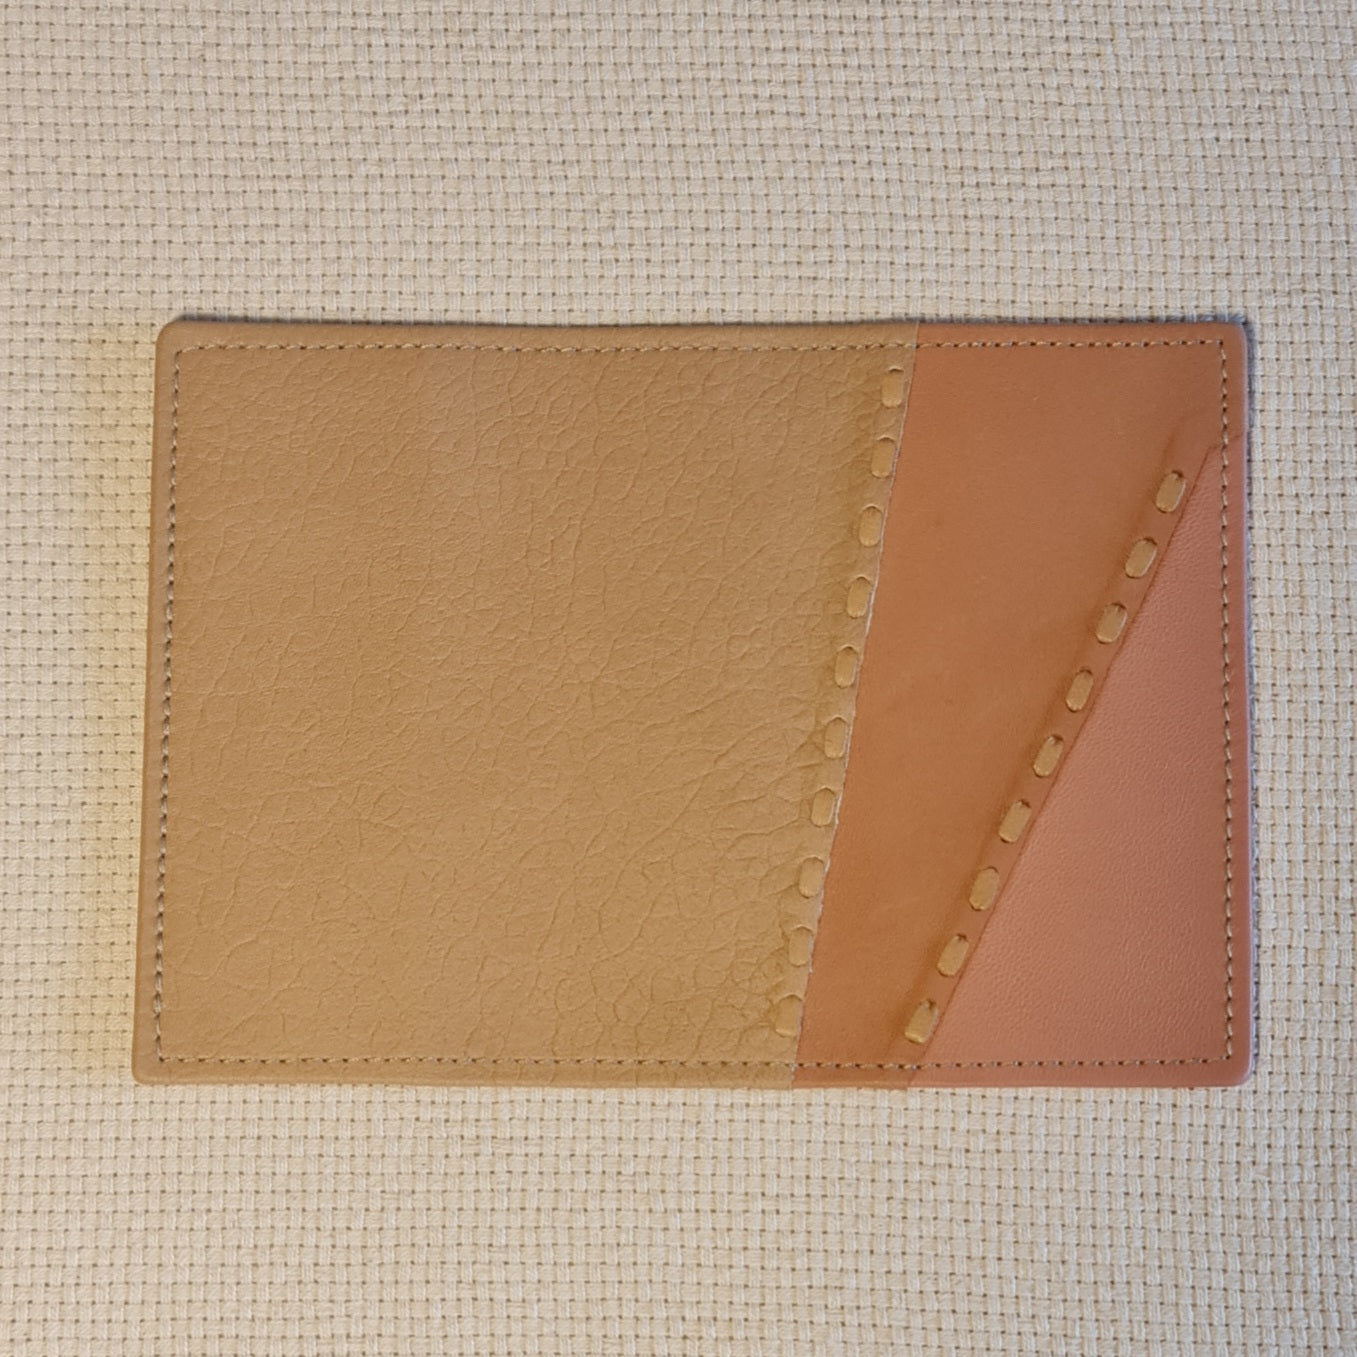 Textured Sand Brown / Light Brown / Soft Pink Leather Passport Covers with Textured Sand Brown Back and Vertical Triangular Decorative Seam (RRA)